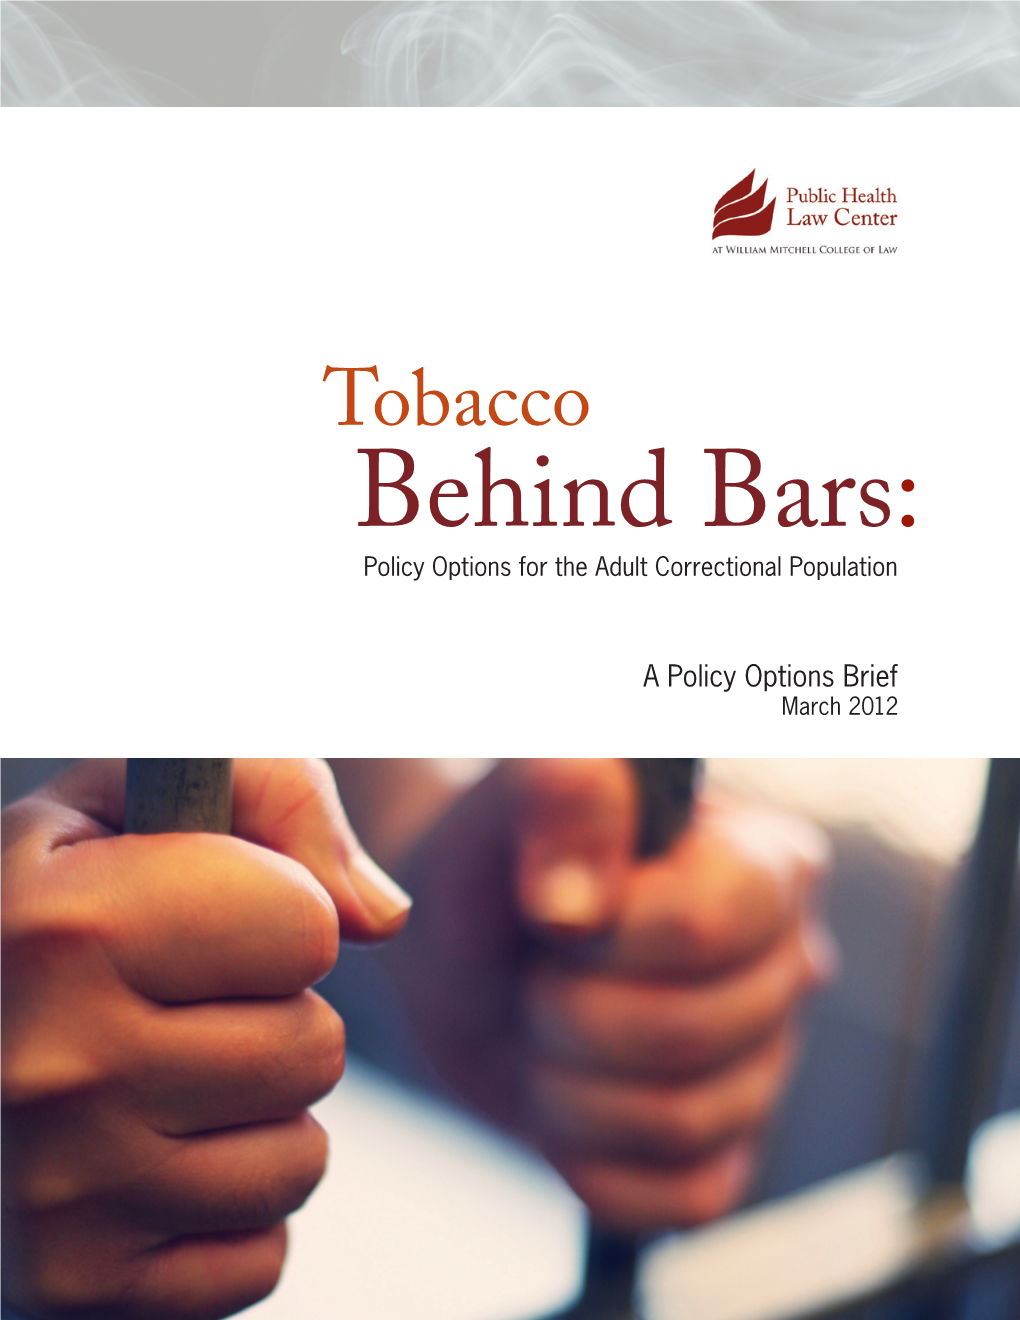 Tobacco Behind Bars: Policy Options for the Adult Correctional Population (2012)